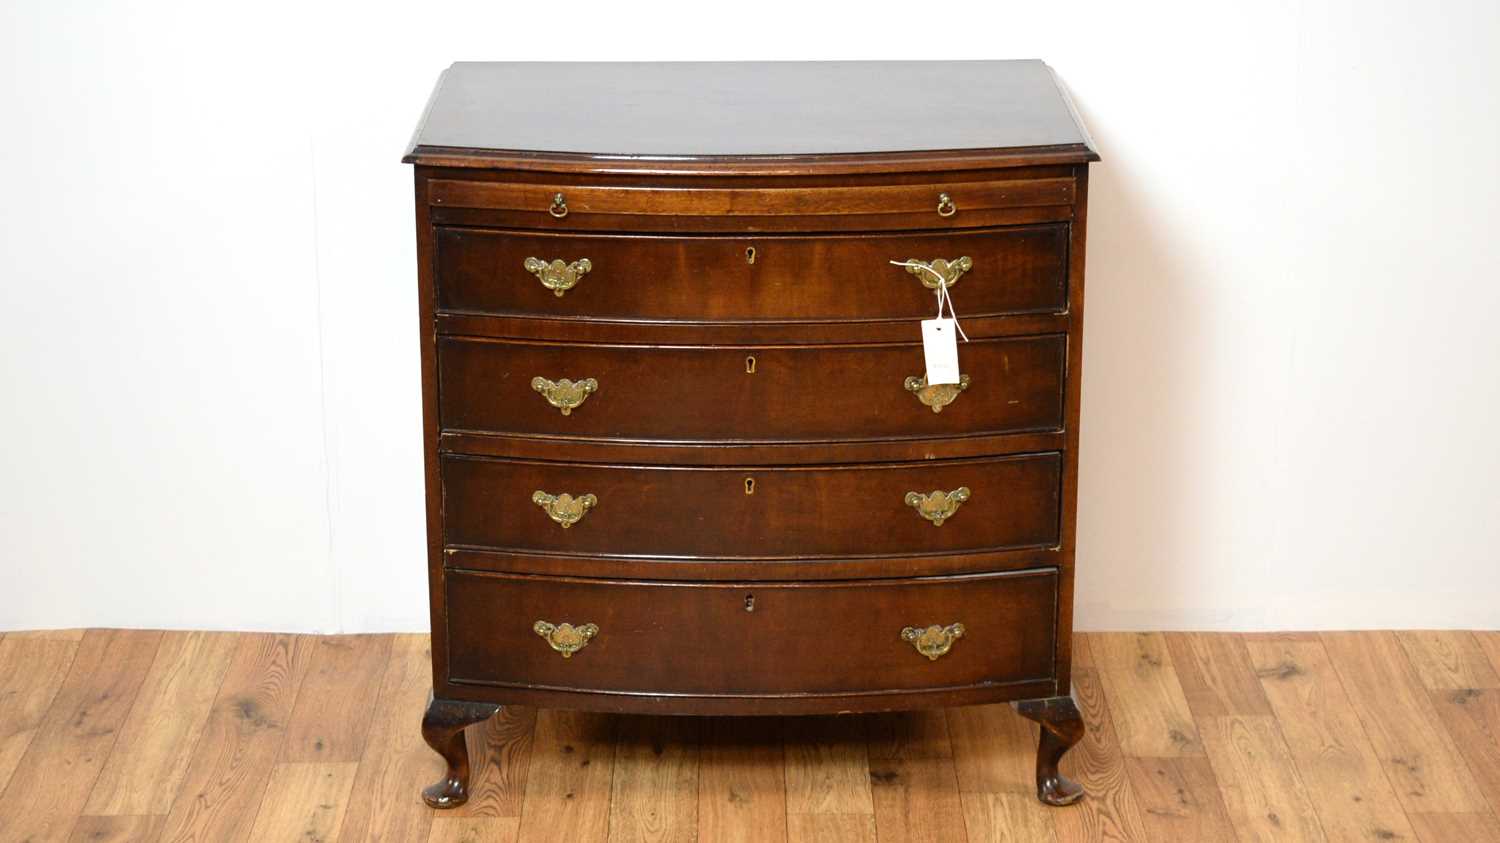 A 20th Century Georgian-style bachelors mahogany bow chest of drawers